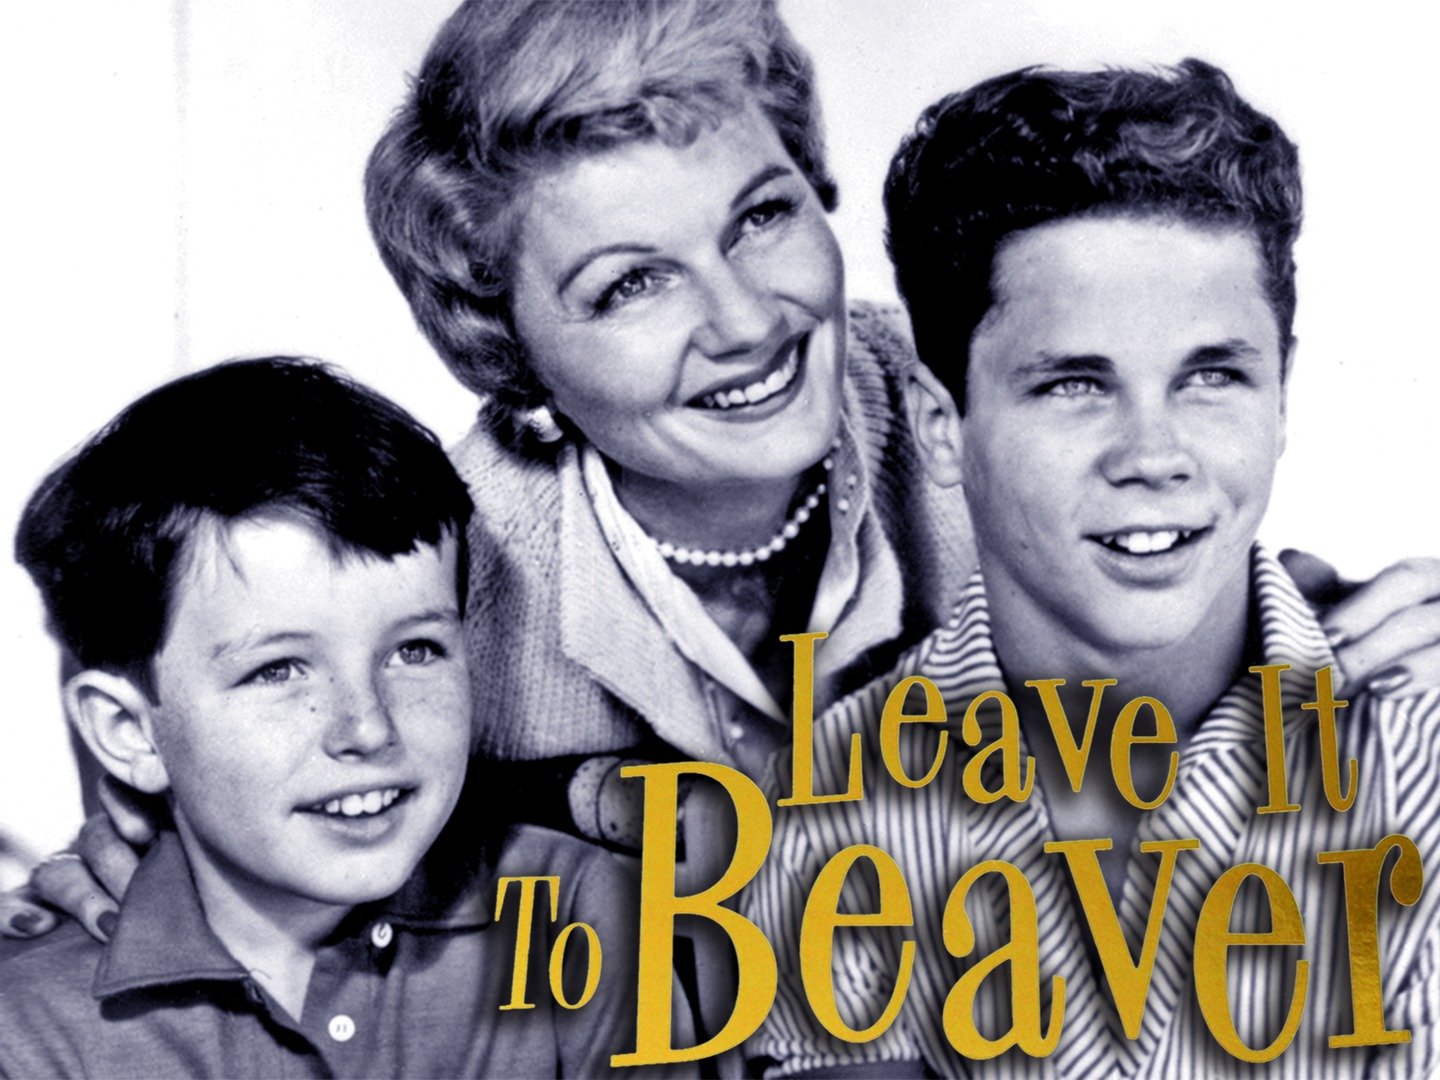 leave it to beaver cast